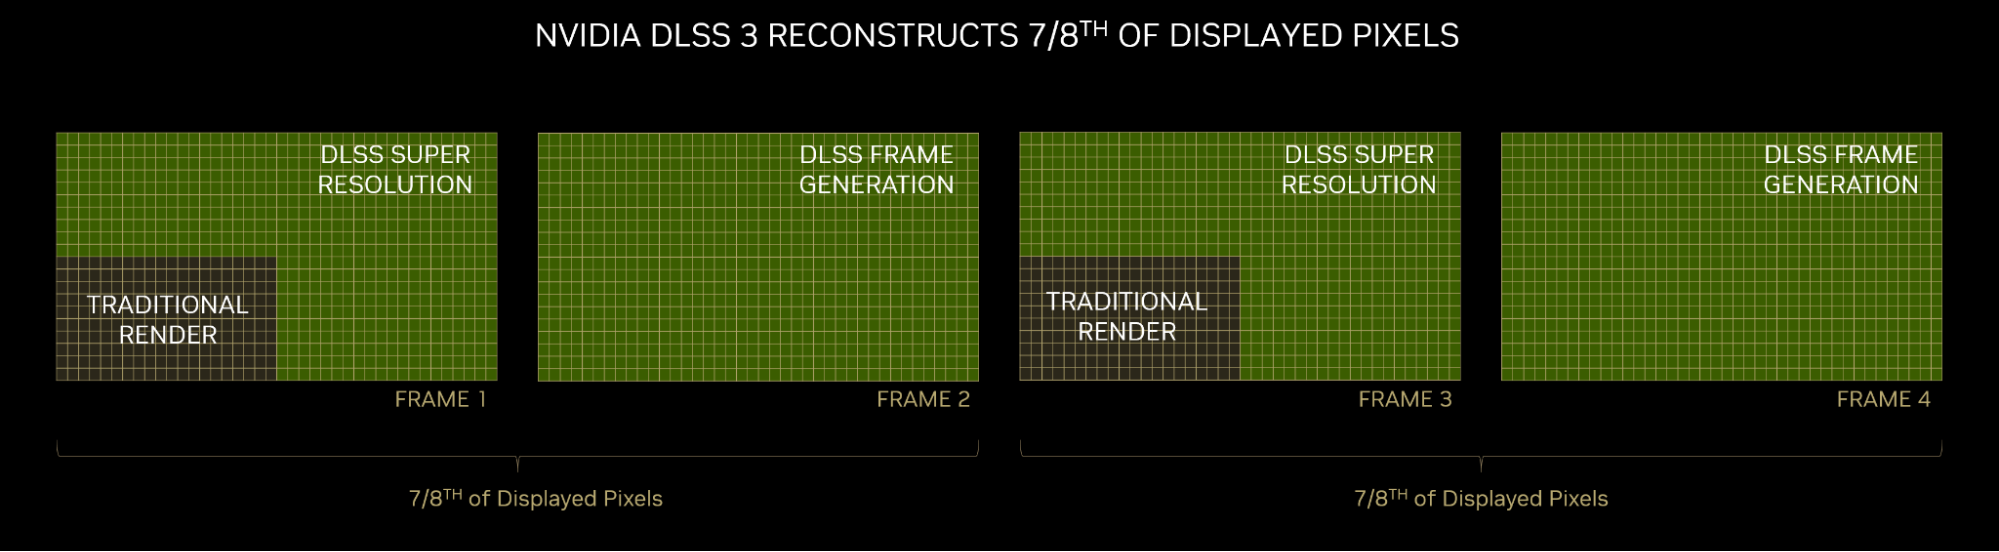 DLSS 3 reconstructs seven-eighths of the total displayed pixels, increasing performance significantly.